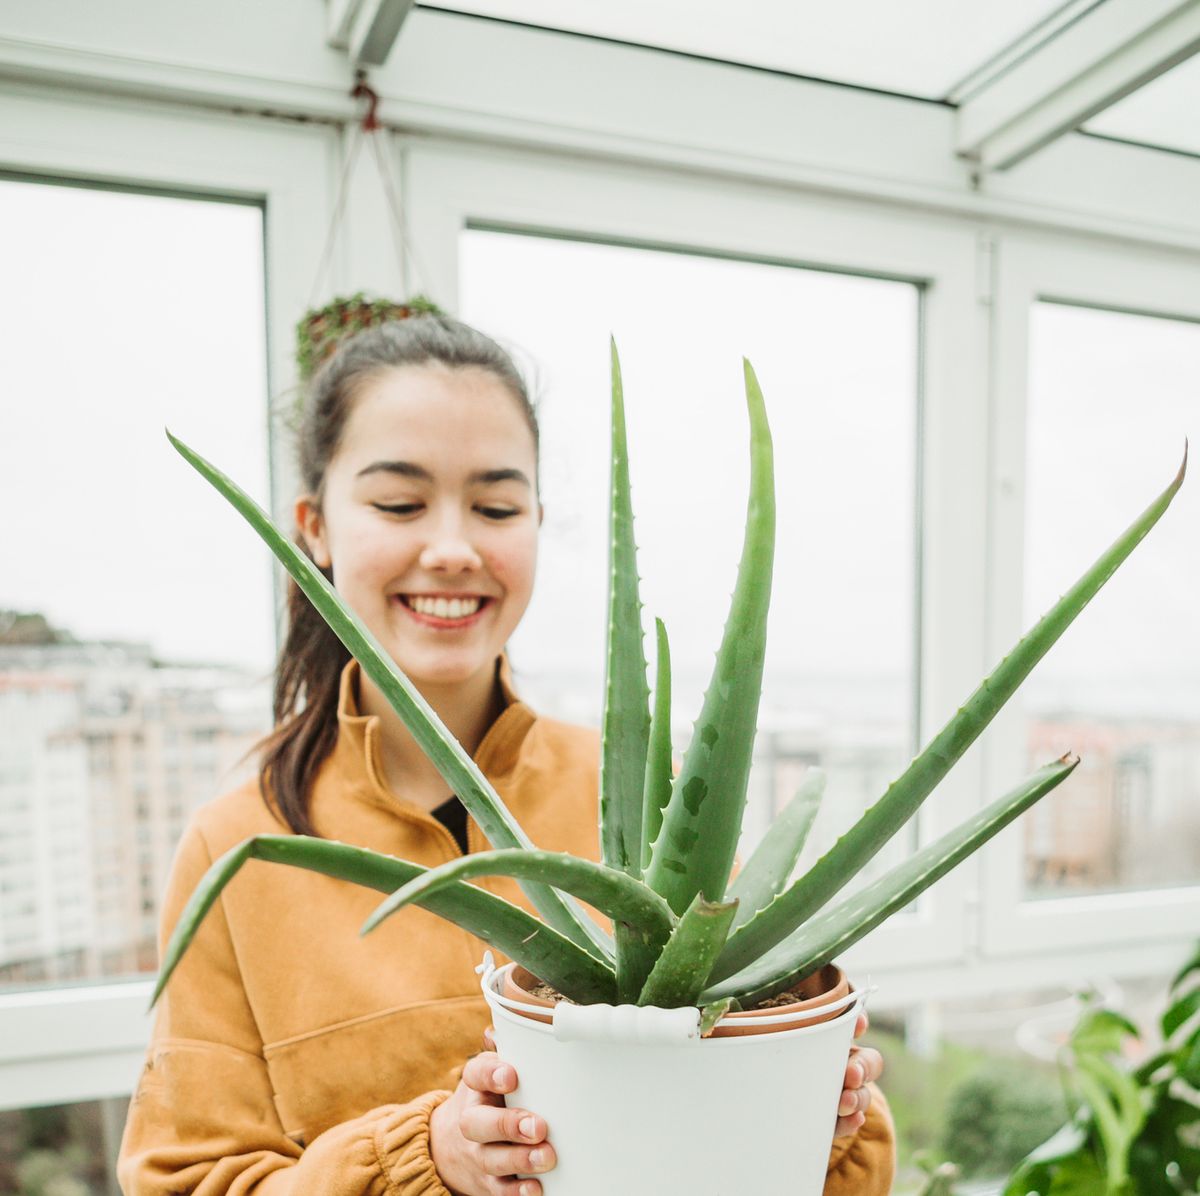 How to Cut an Aloe Plant, Aloe Vera Uses and Benefits